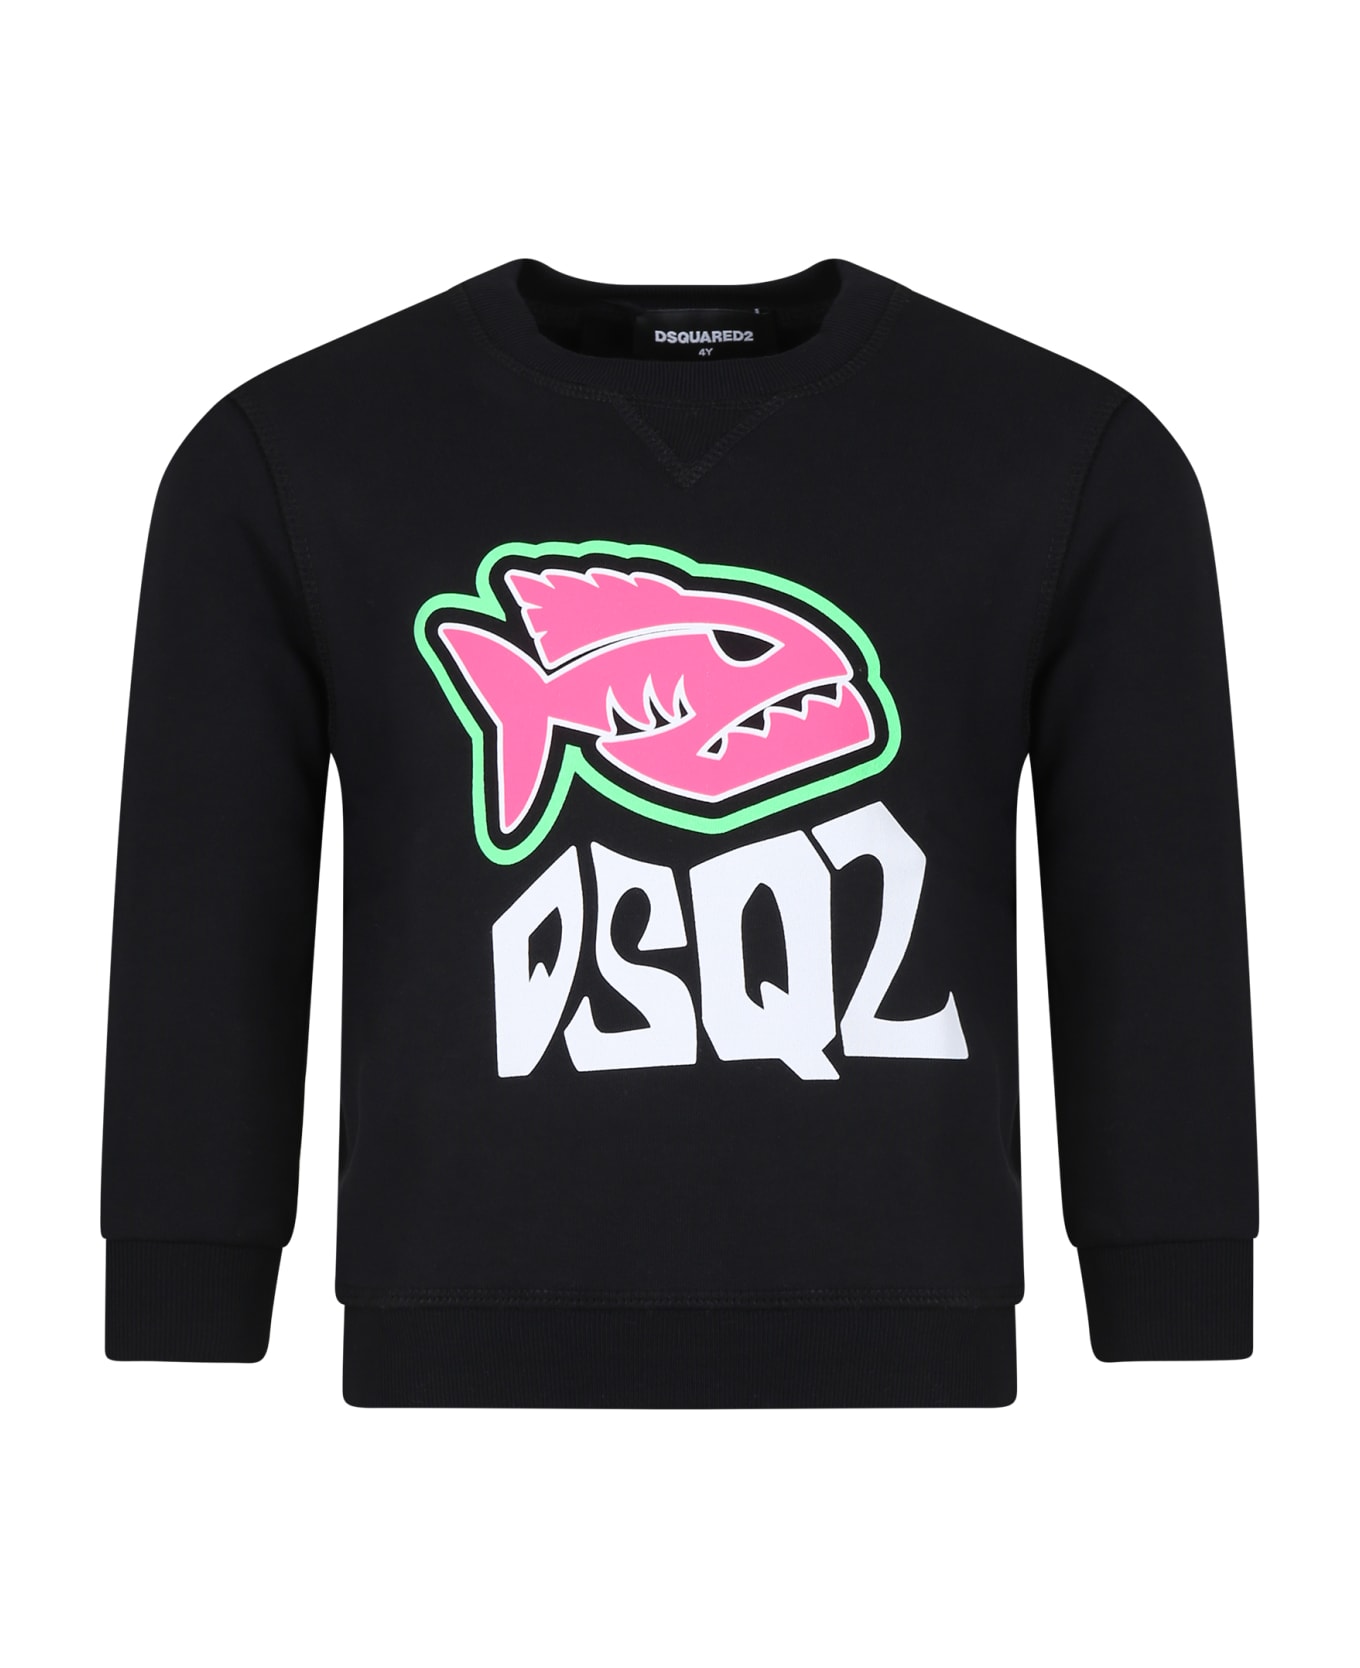 Dsquared2 Black Sweatshirt For Boy With Logo And Print